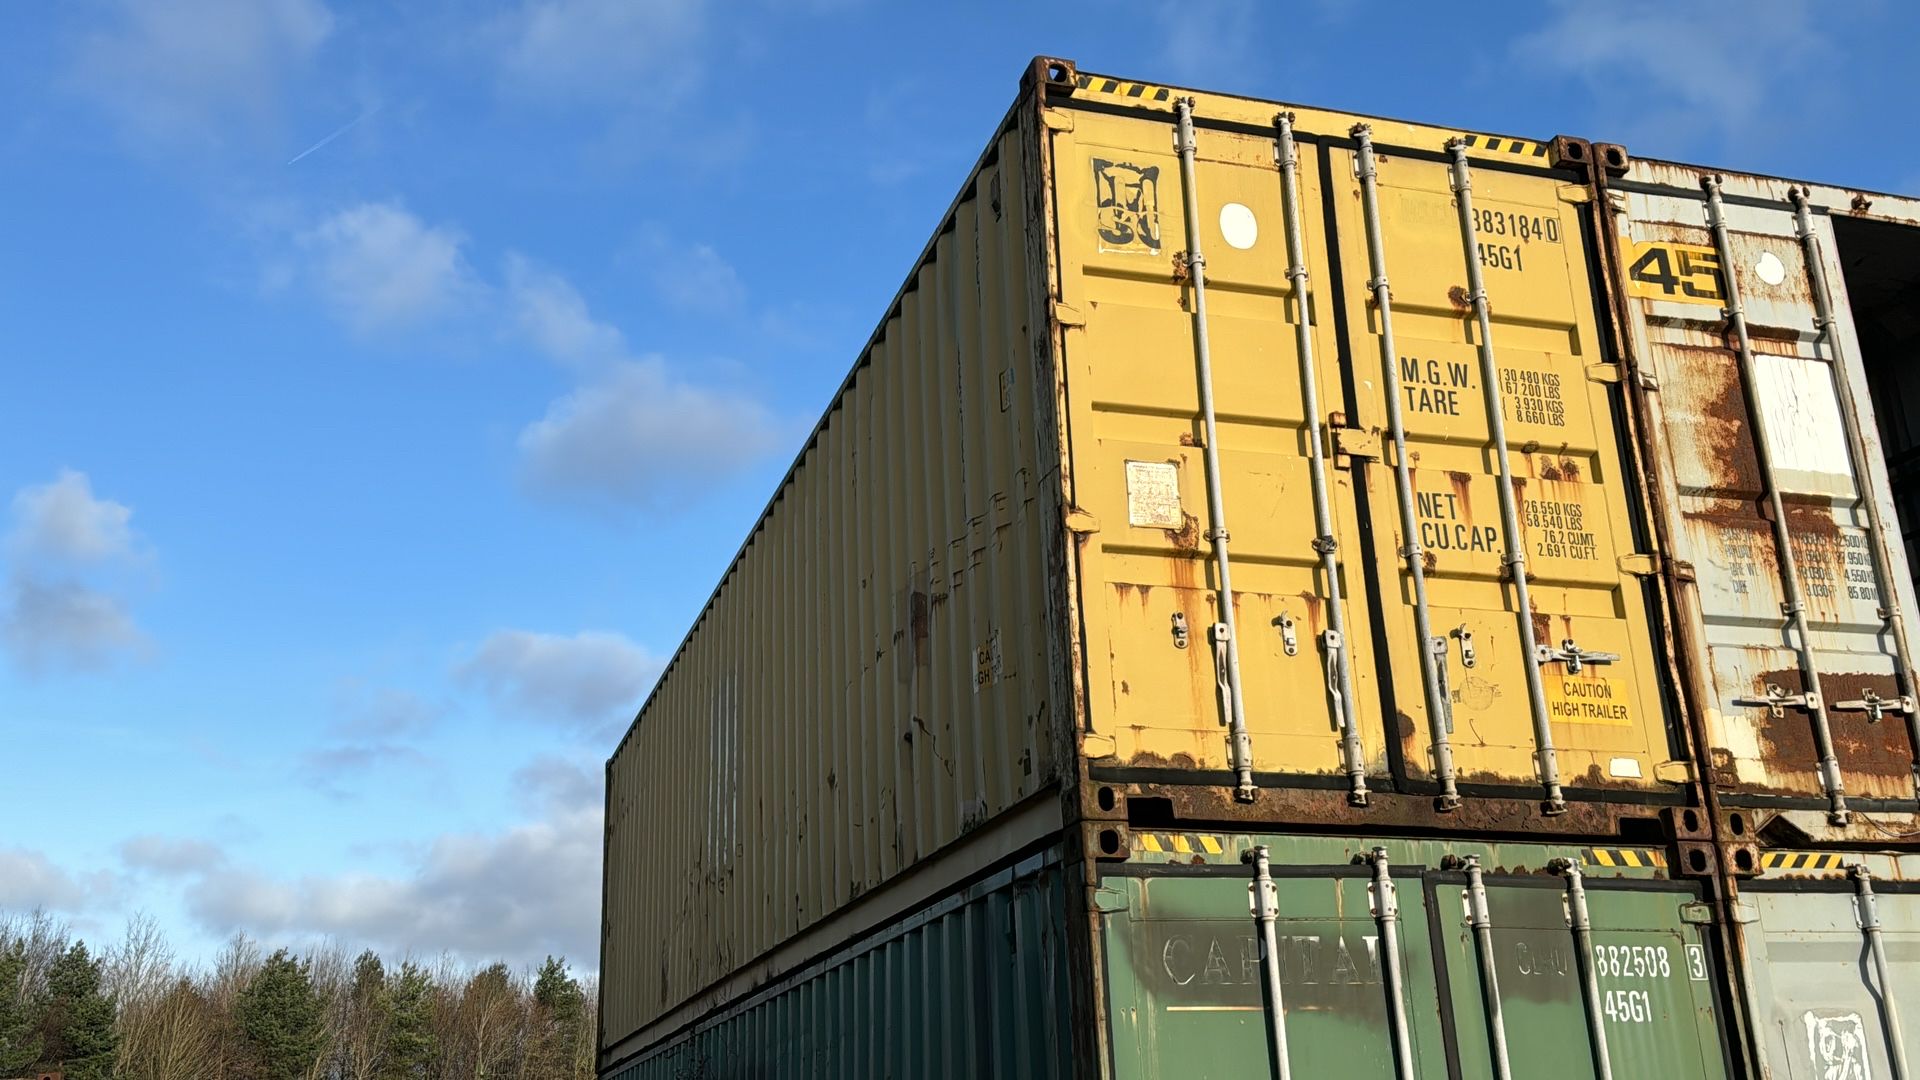 Shipping container, 48 (MSCU883184045G1) - Image 3 of 3